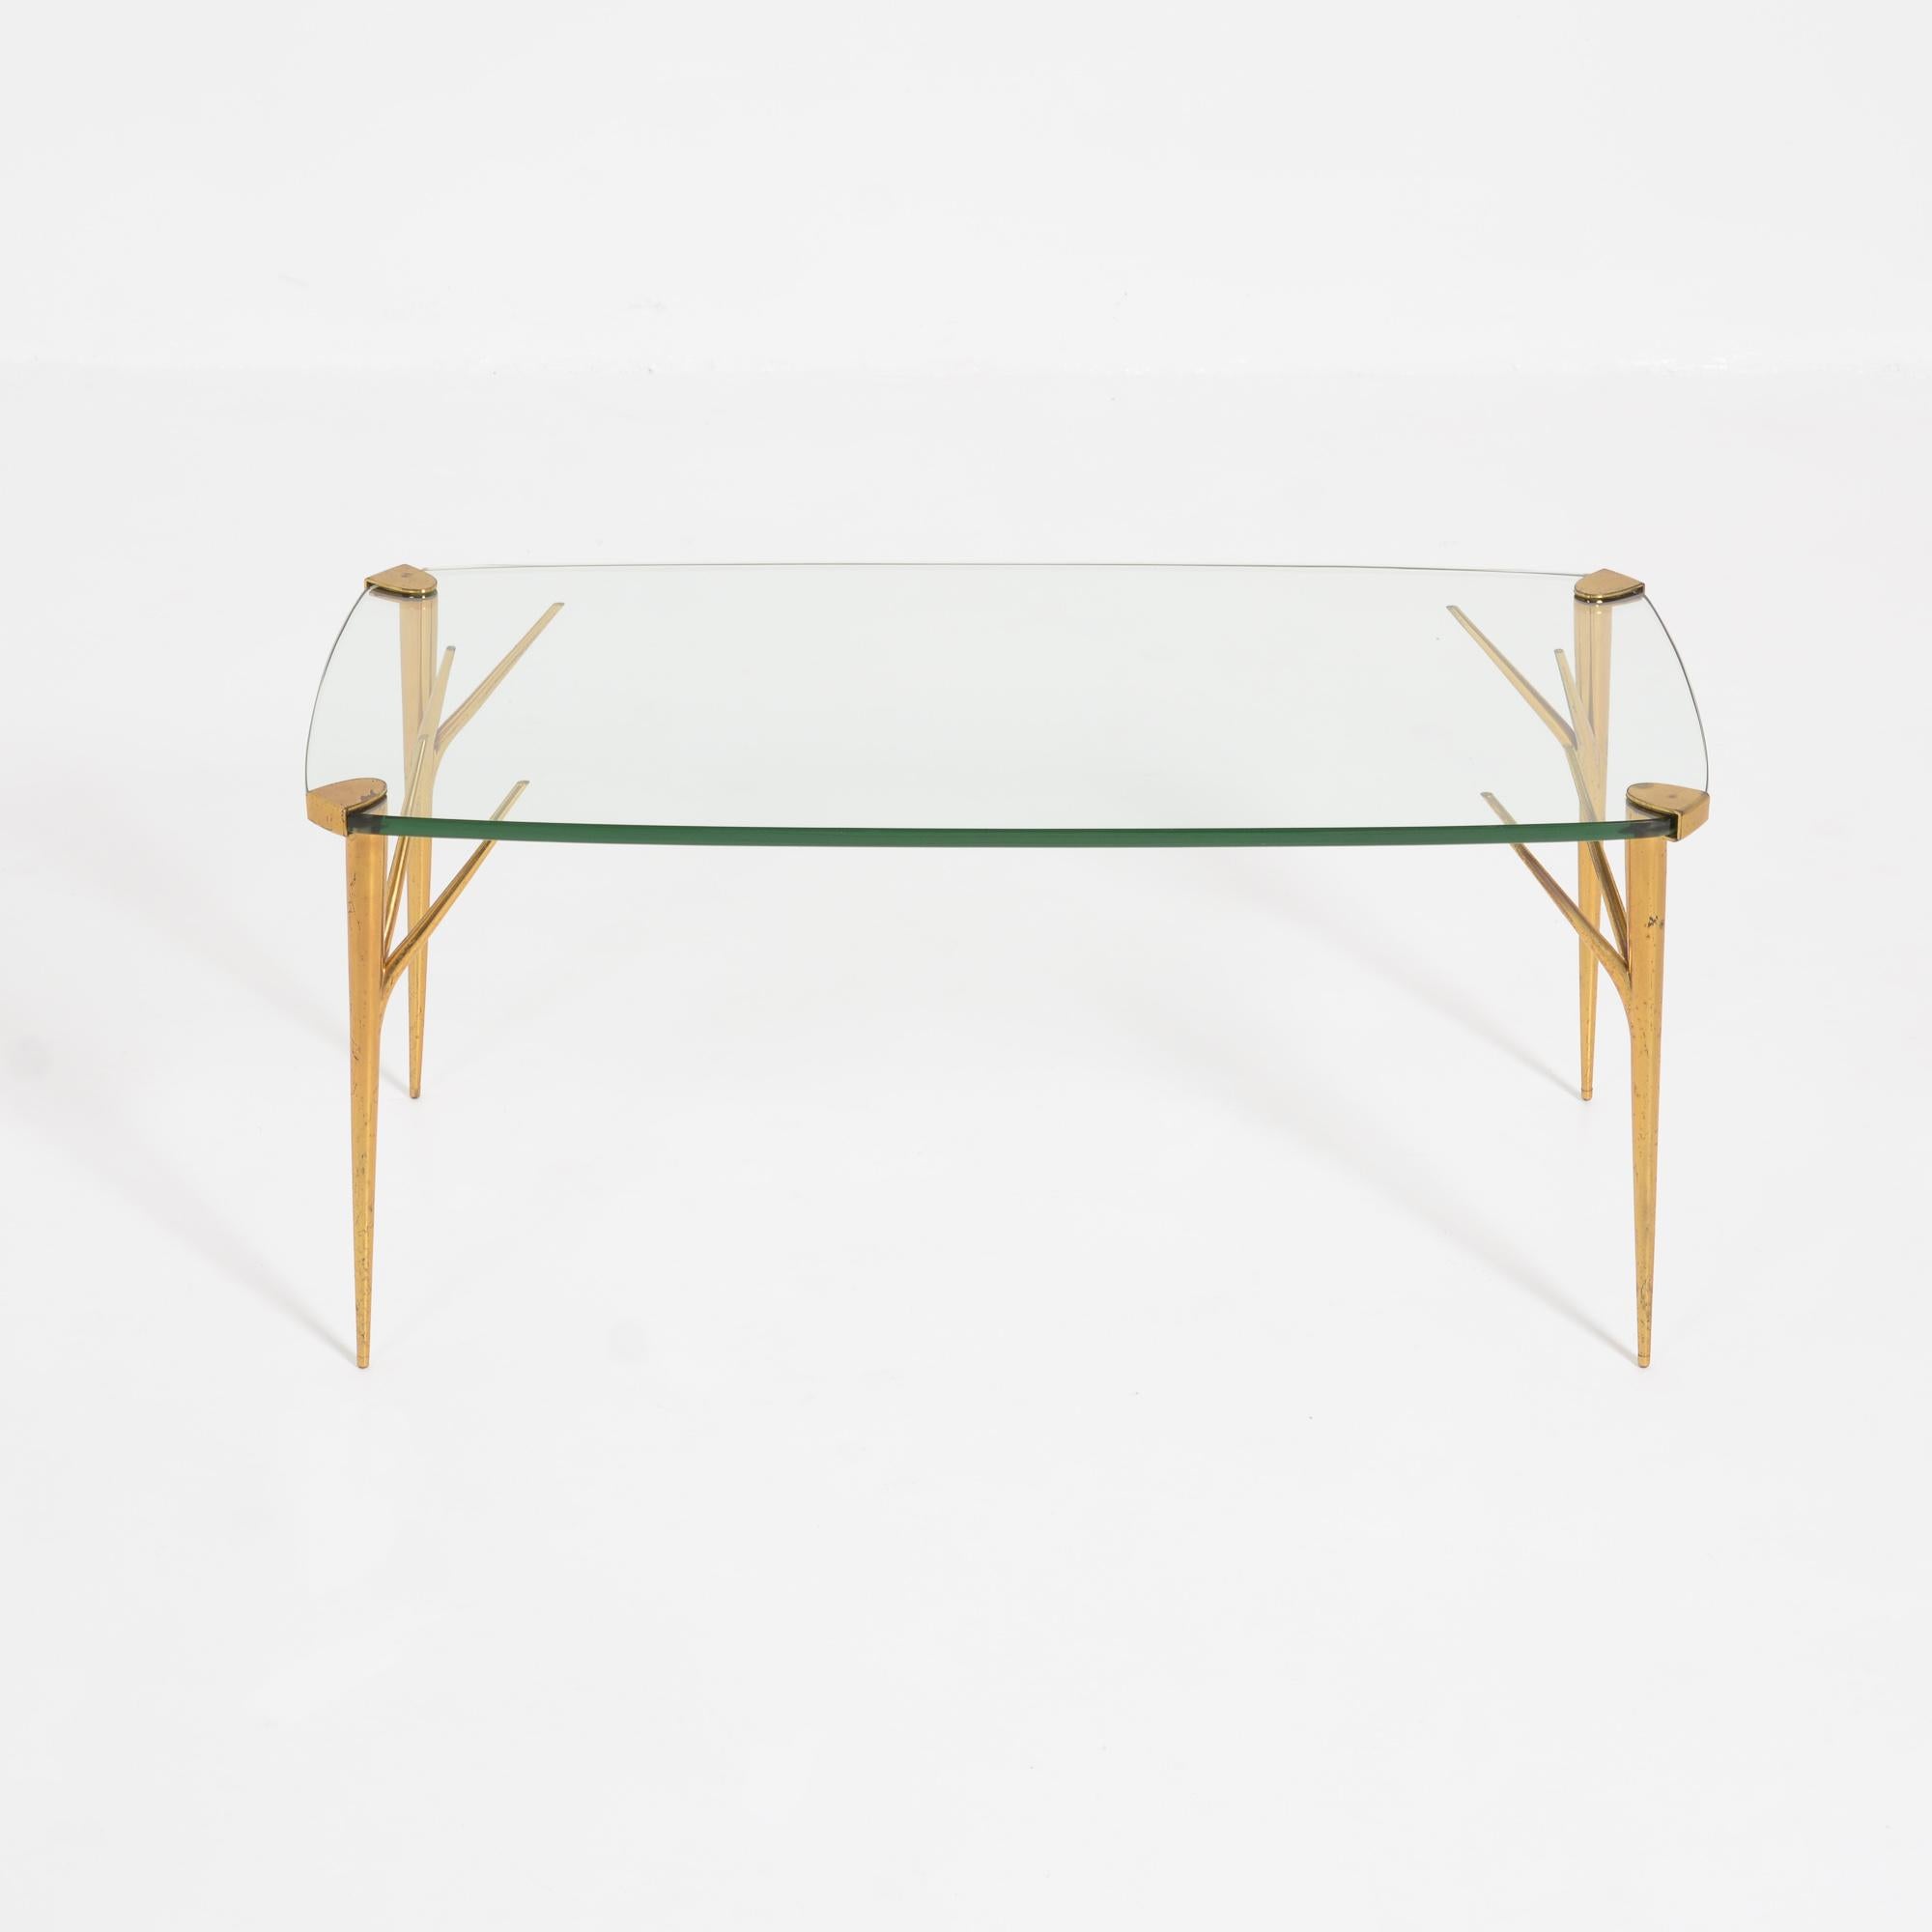 This beautiful coffee table was designed by Max Ingrand and manufactured by Fontana Arte in 1956.
The elegant brass legs support the rectangle crystal glass top.
This table is in good authentic condition, the glass top has a tiny chip, visible in